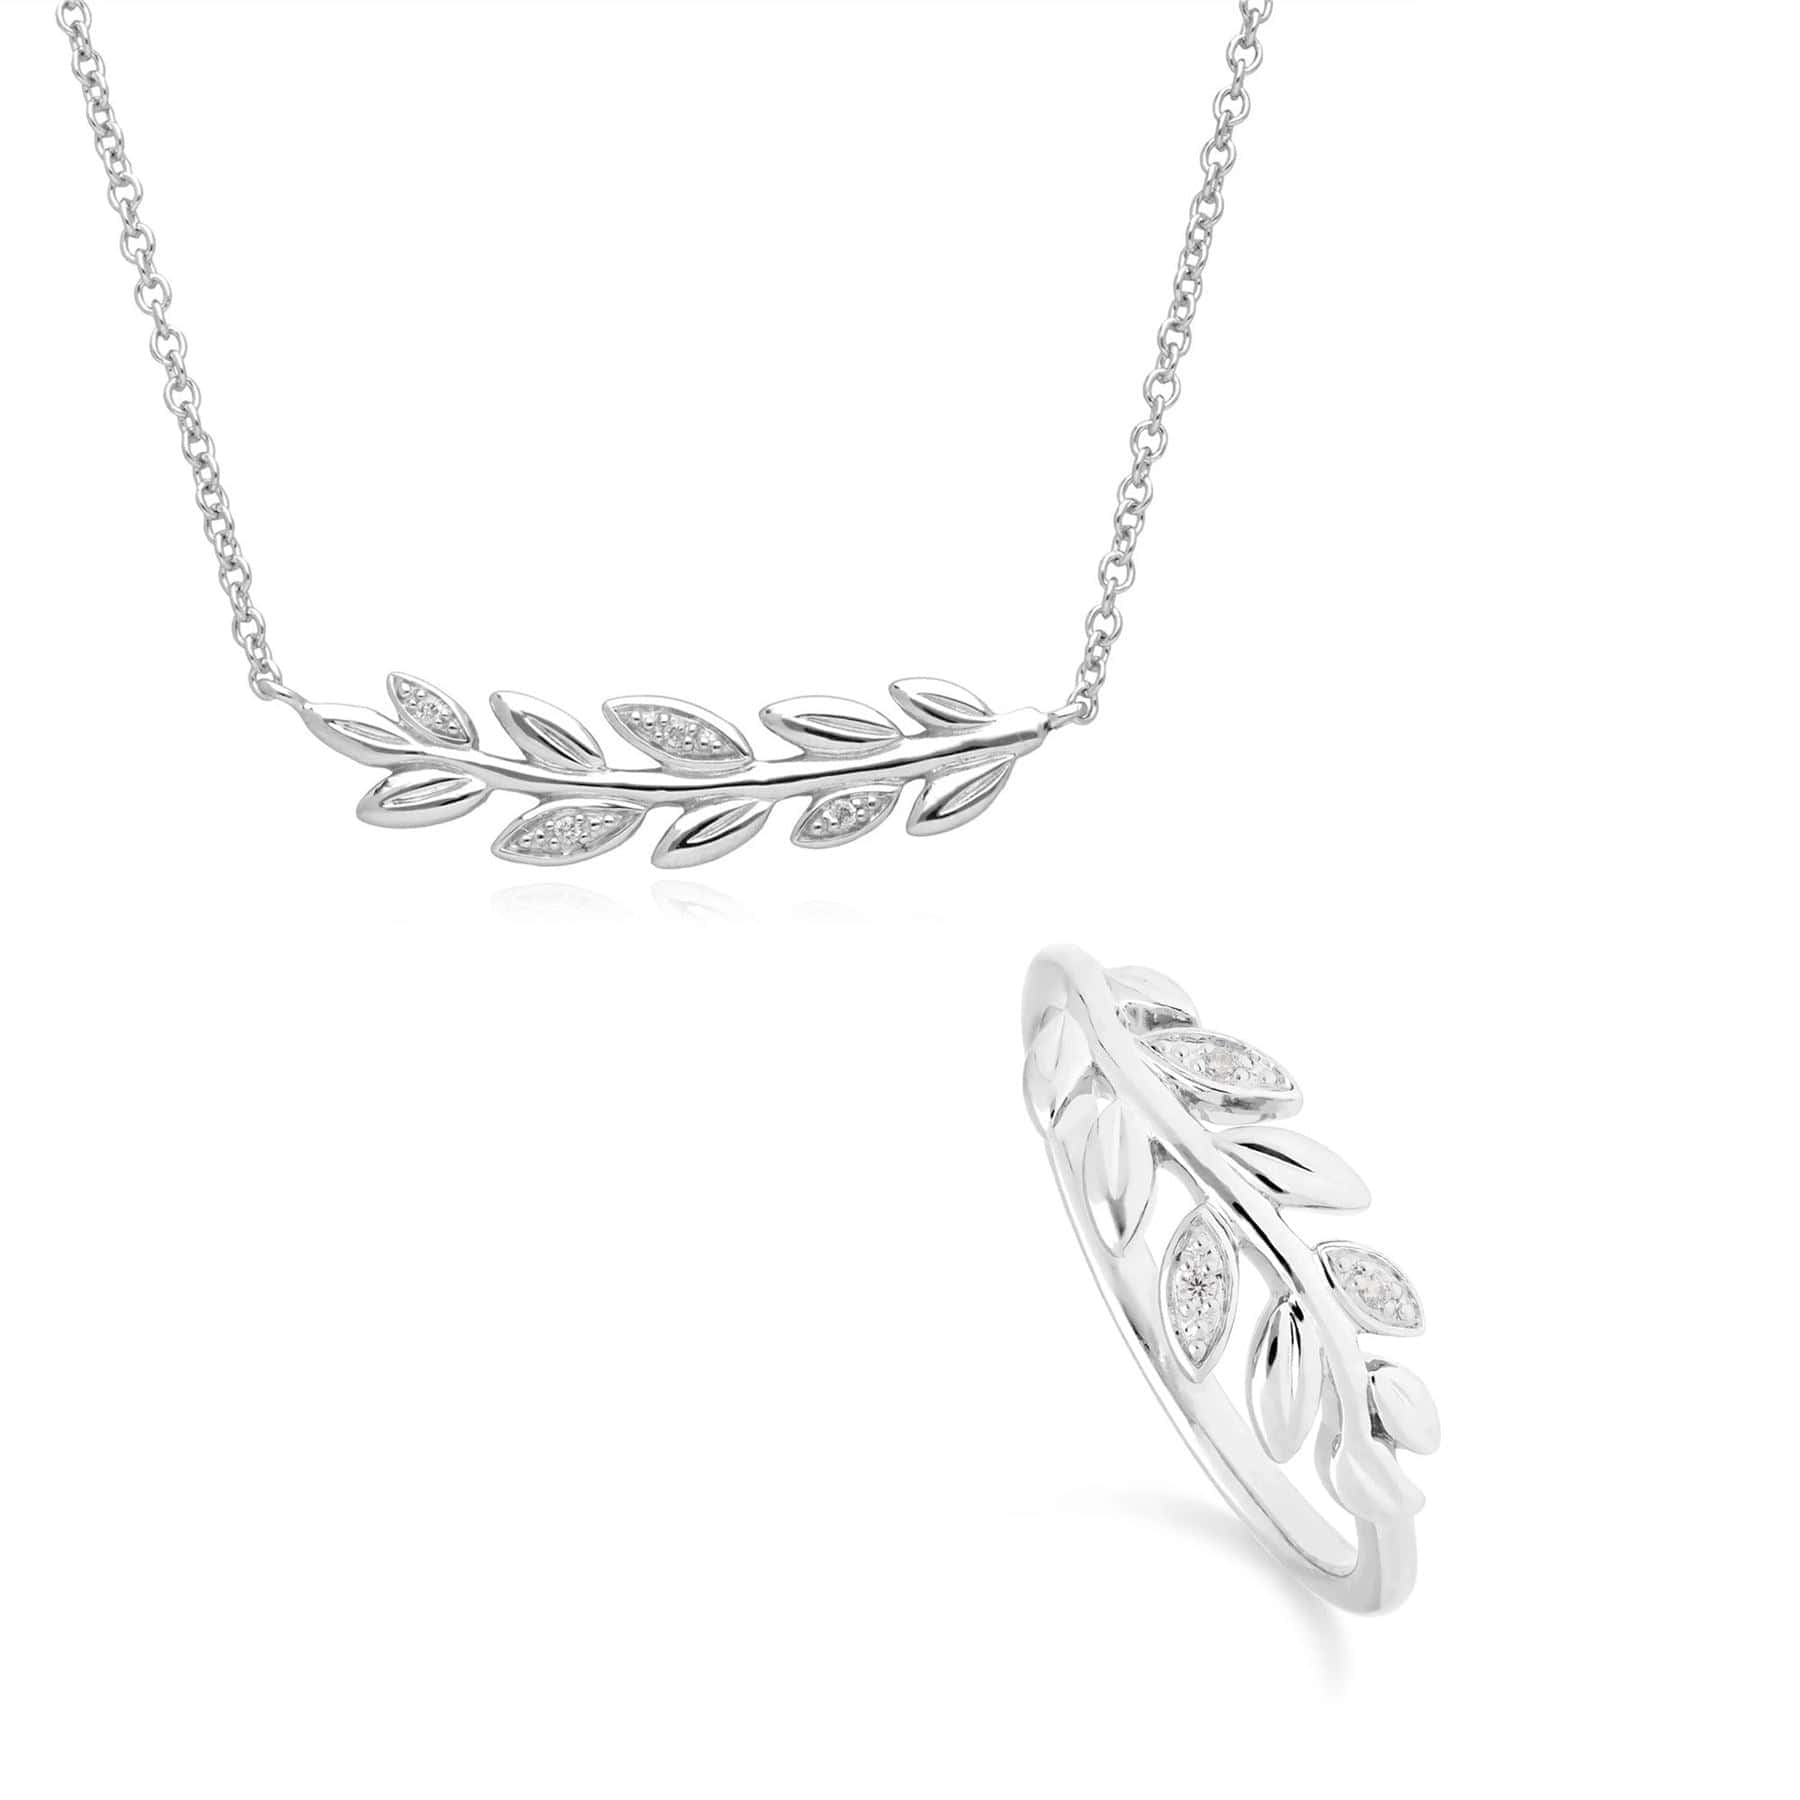 162N0035019-162R0397019 O Leaf Diamond Necklace & Ring Set in 9ct White Gold 1